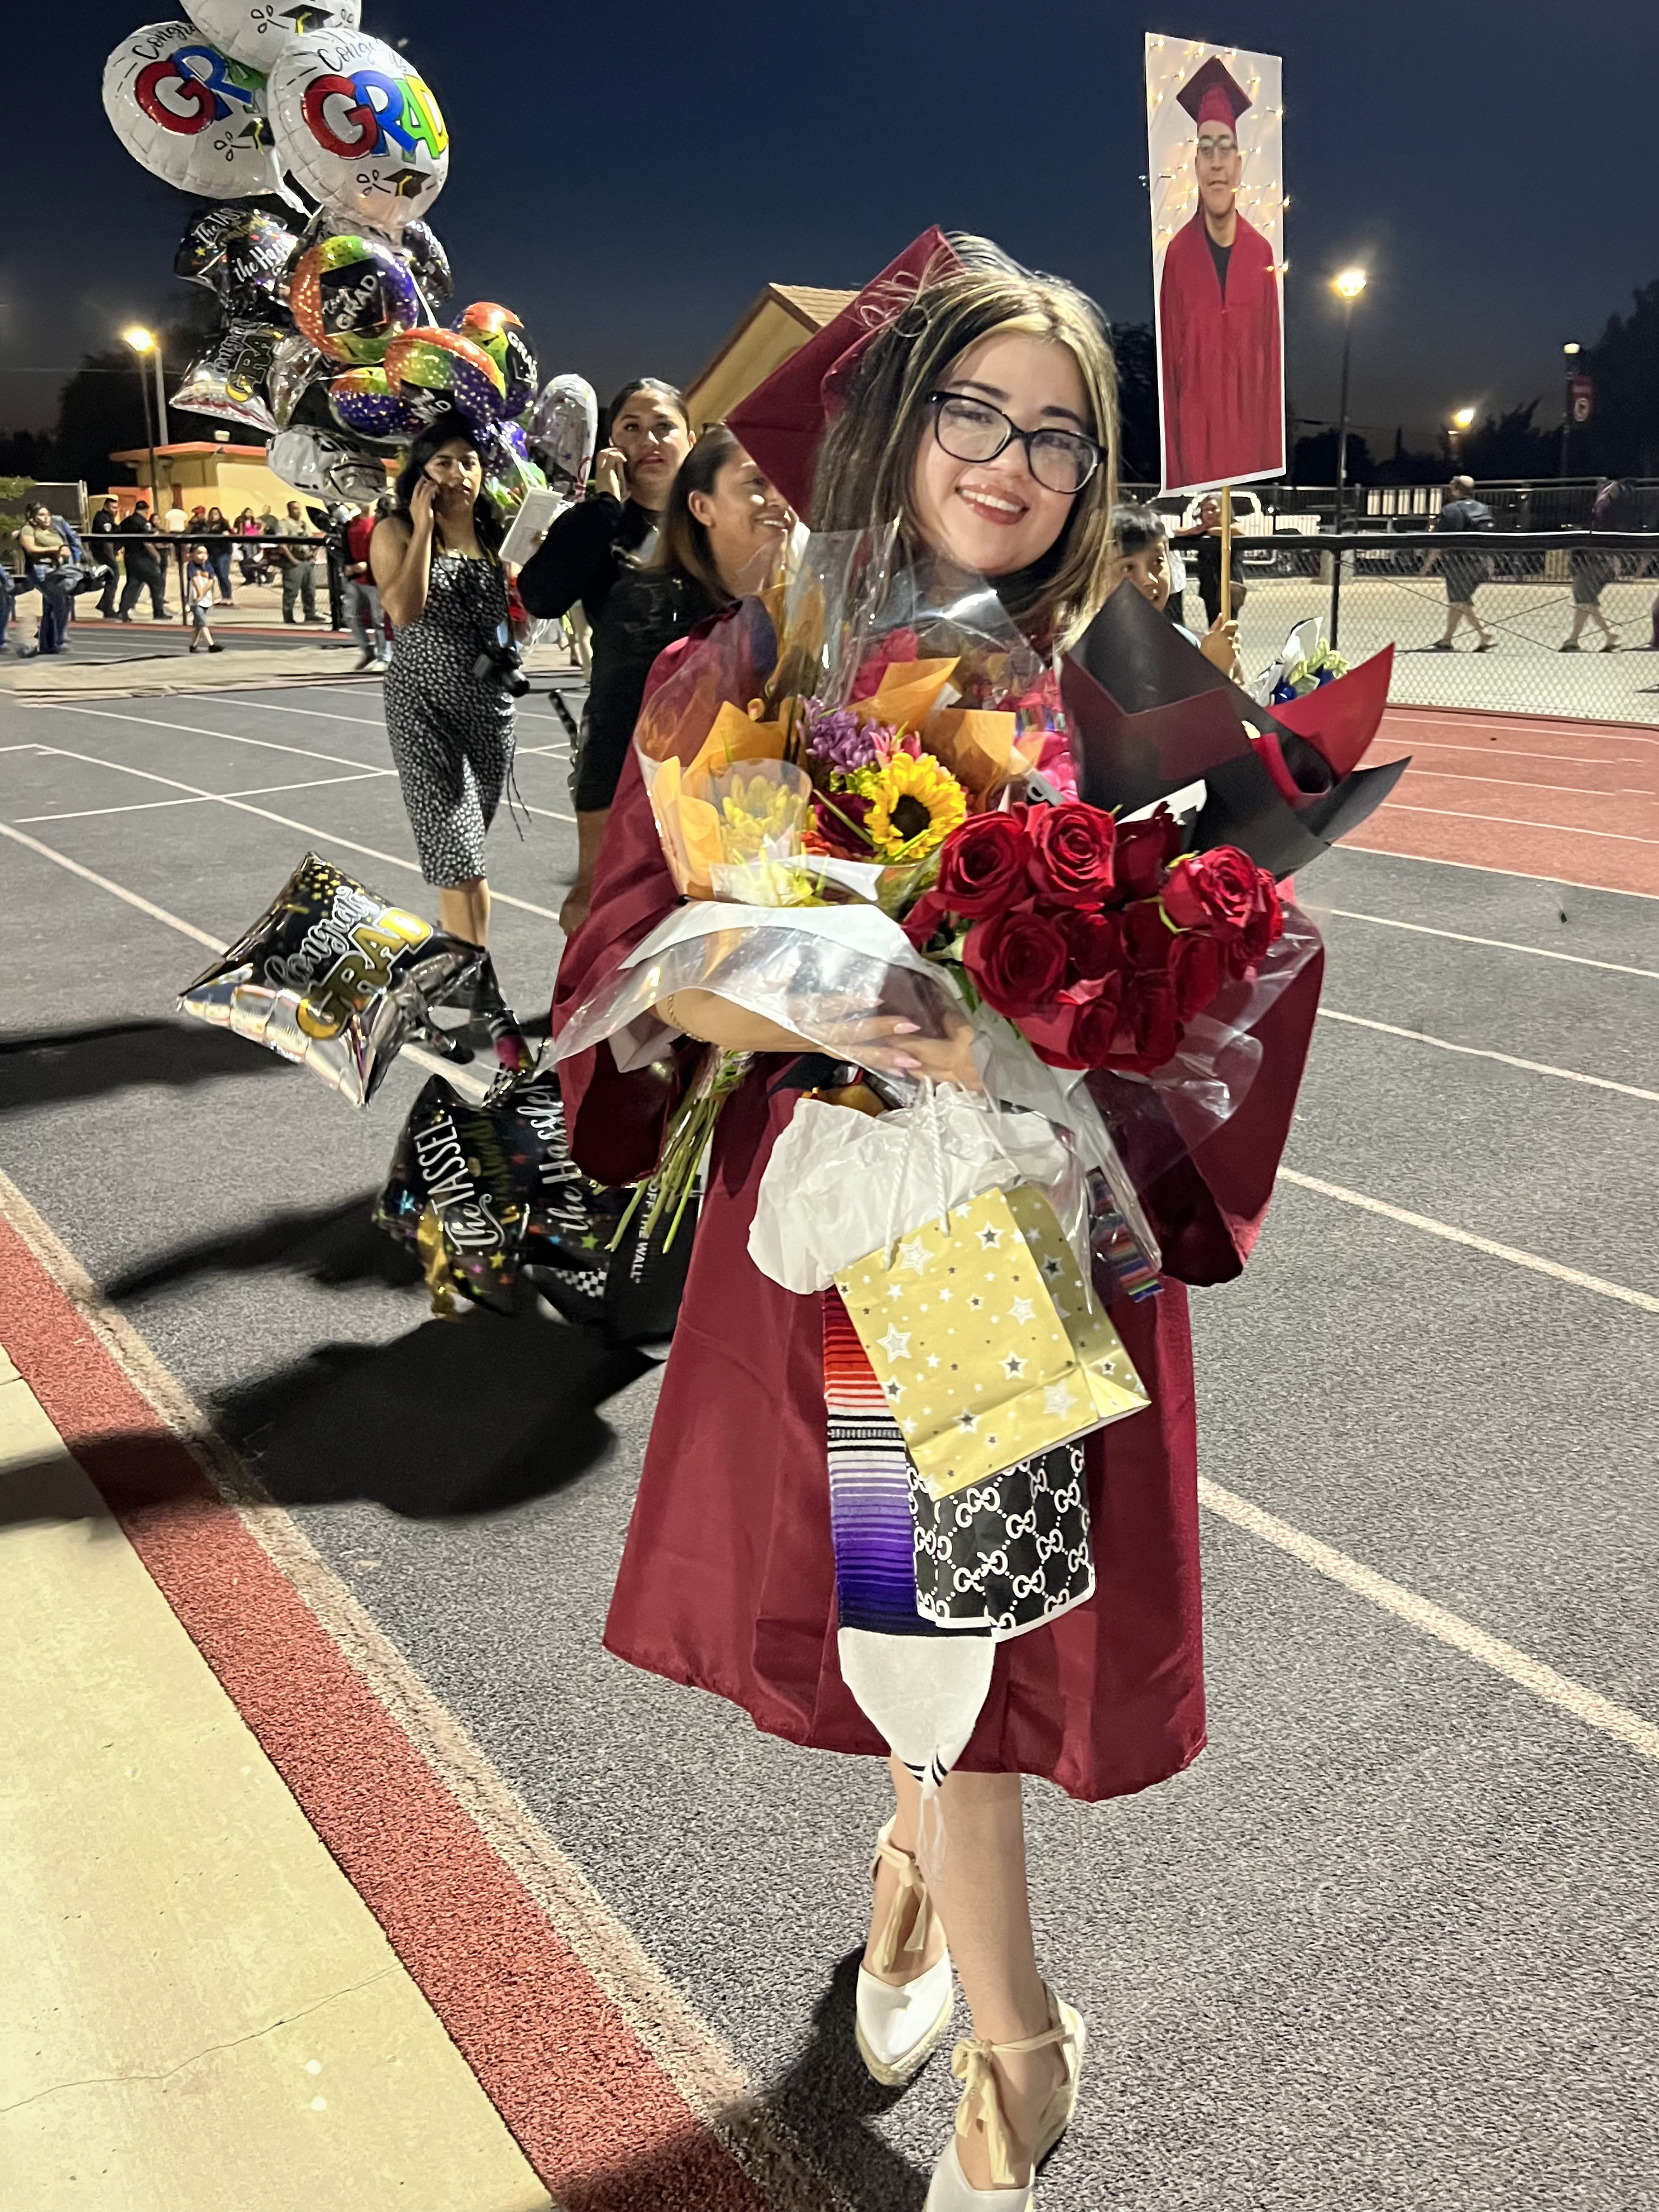 Genesis Iñiguez poses for a photo after graduating from Orosi High School.